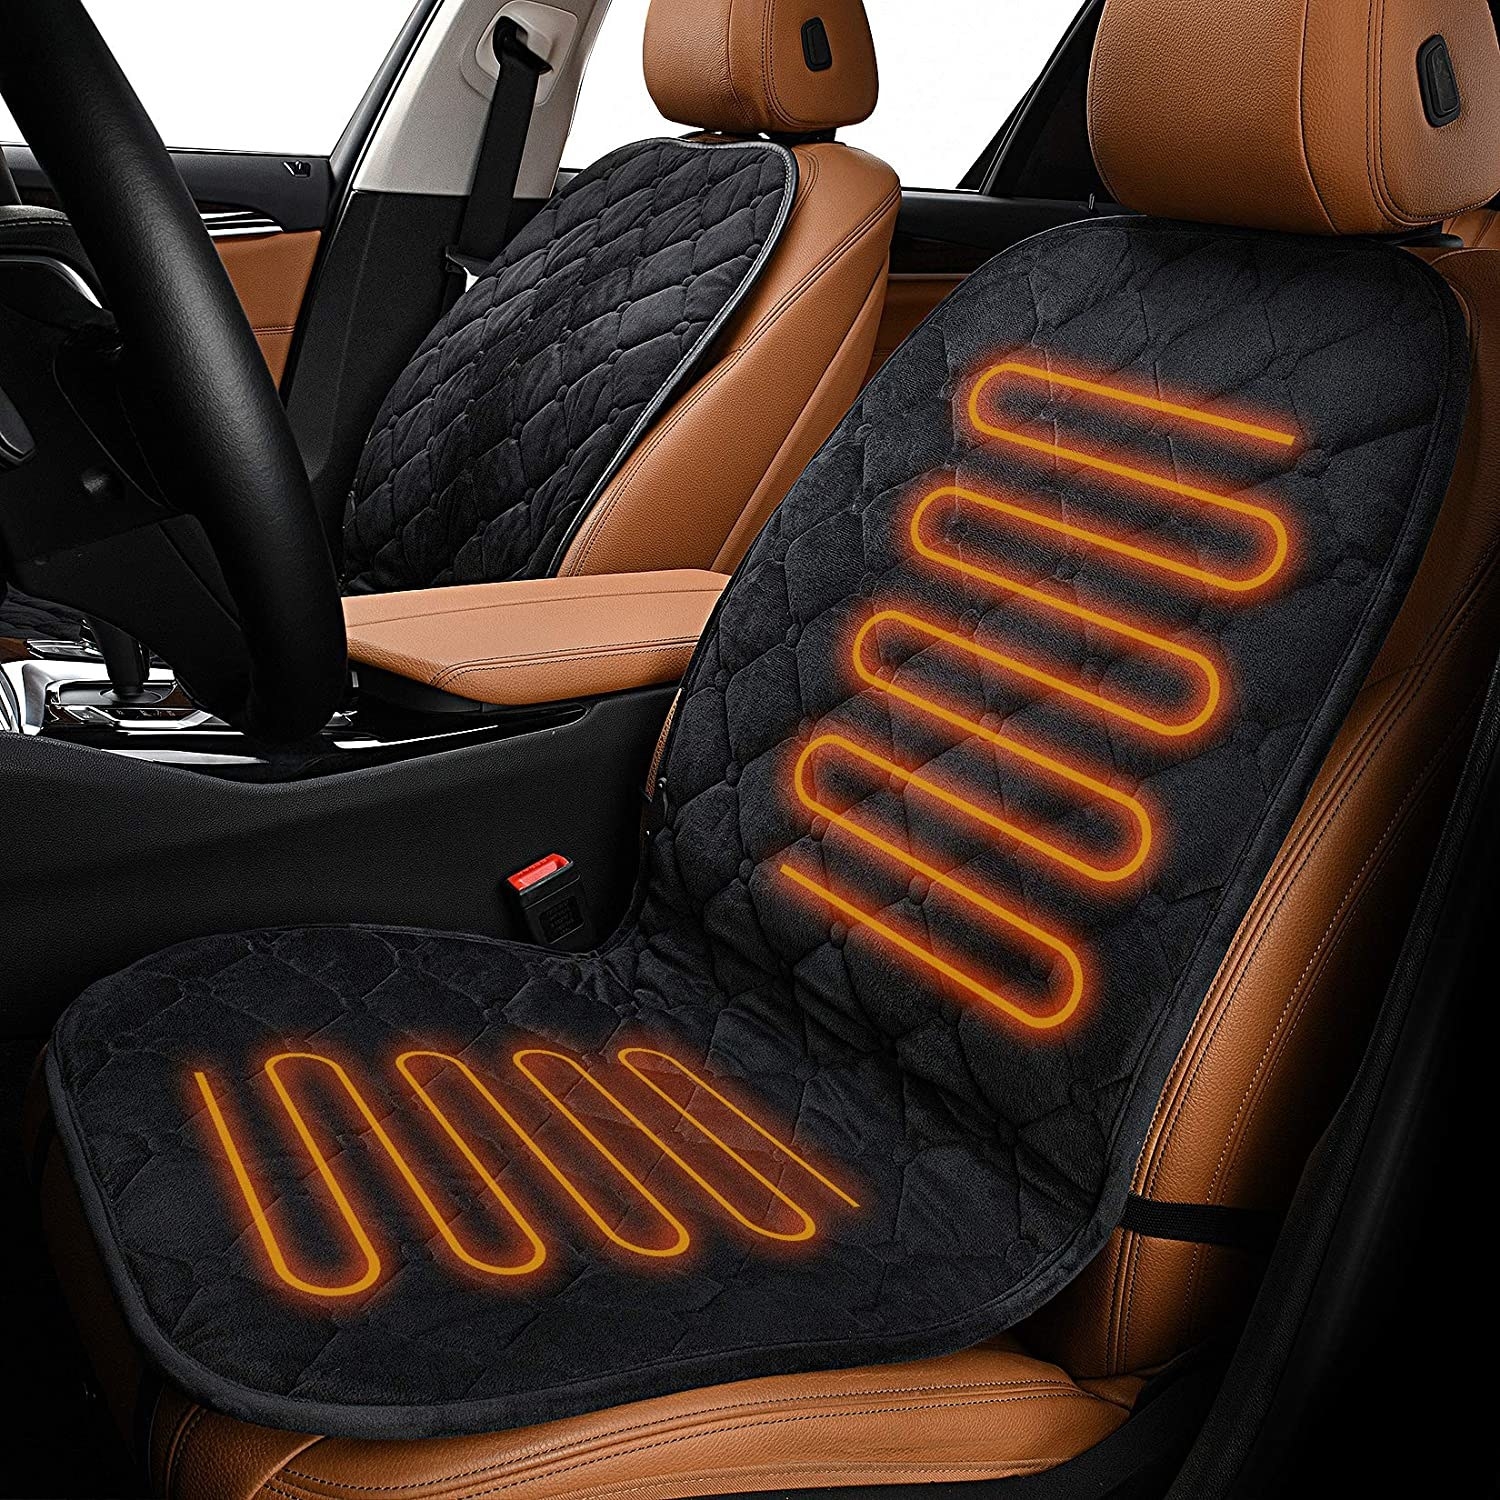 The thin, gridded black seat covers in a car; it covers the back and most of the seat